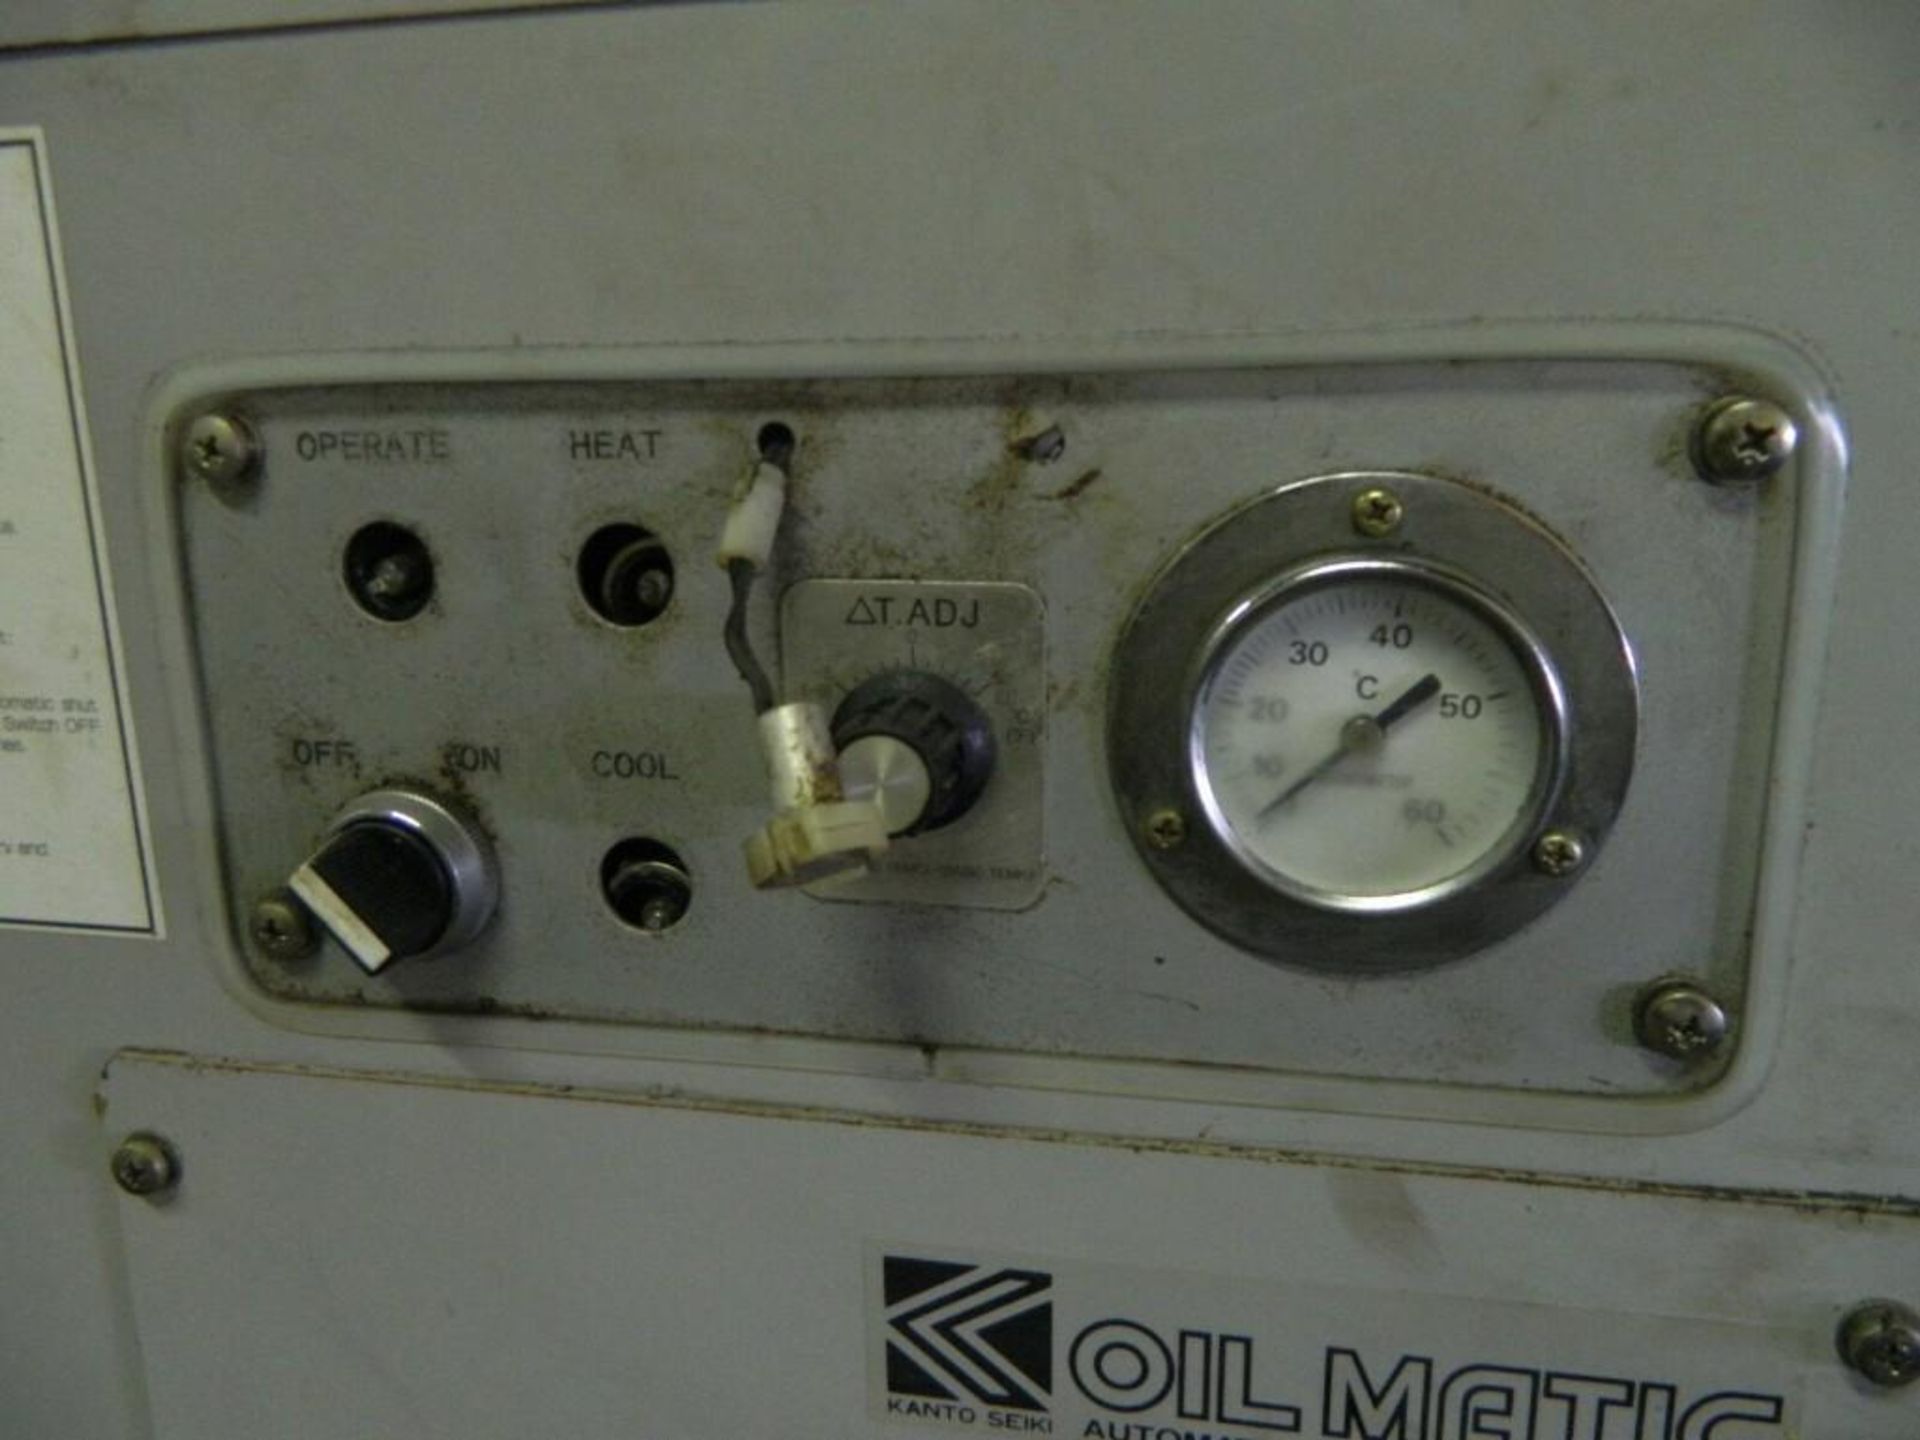 Oilmatic Automatic Oil Temperature Regulator Spindle Chiller - Image 8 of 8